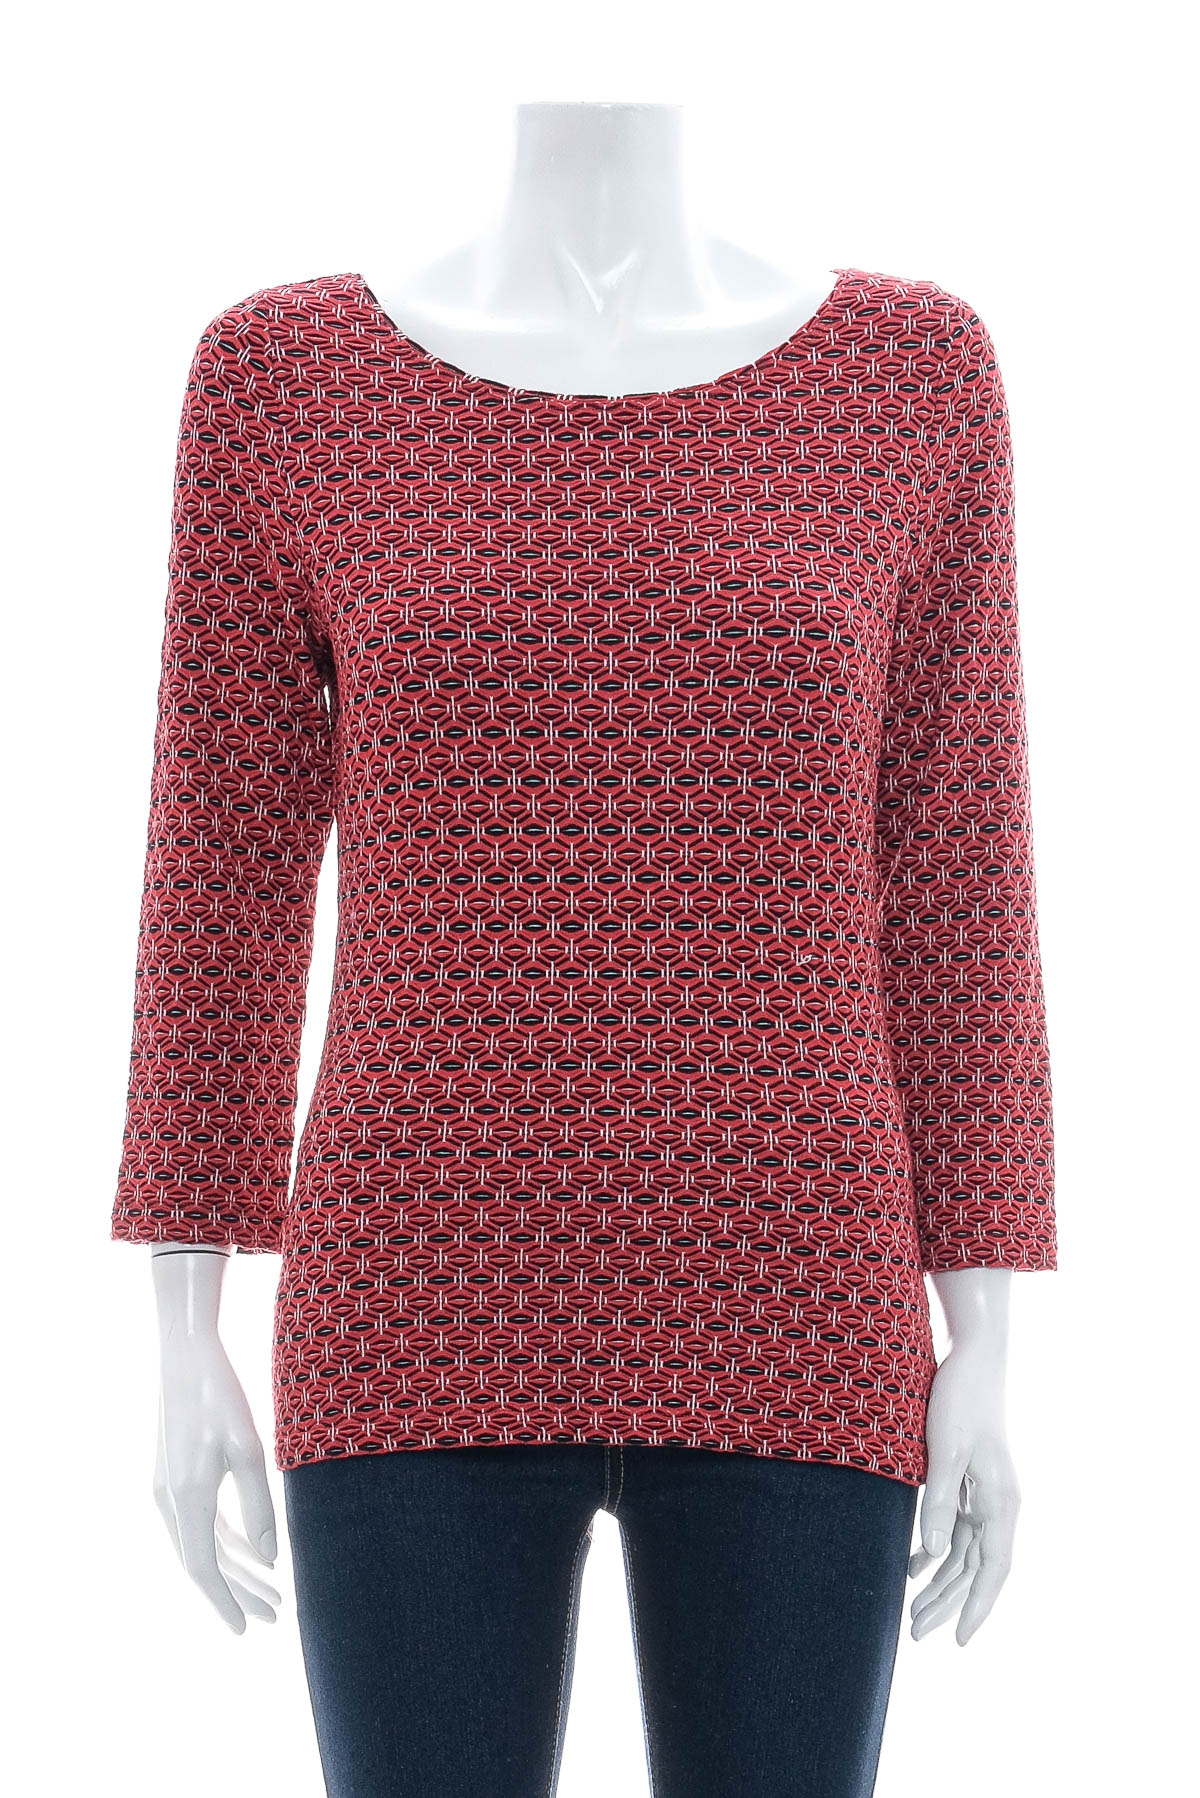 Women's sweater - Claudia Strater - 0